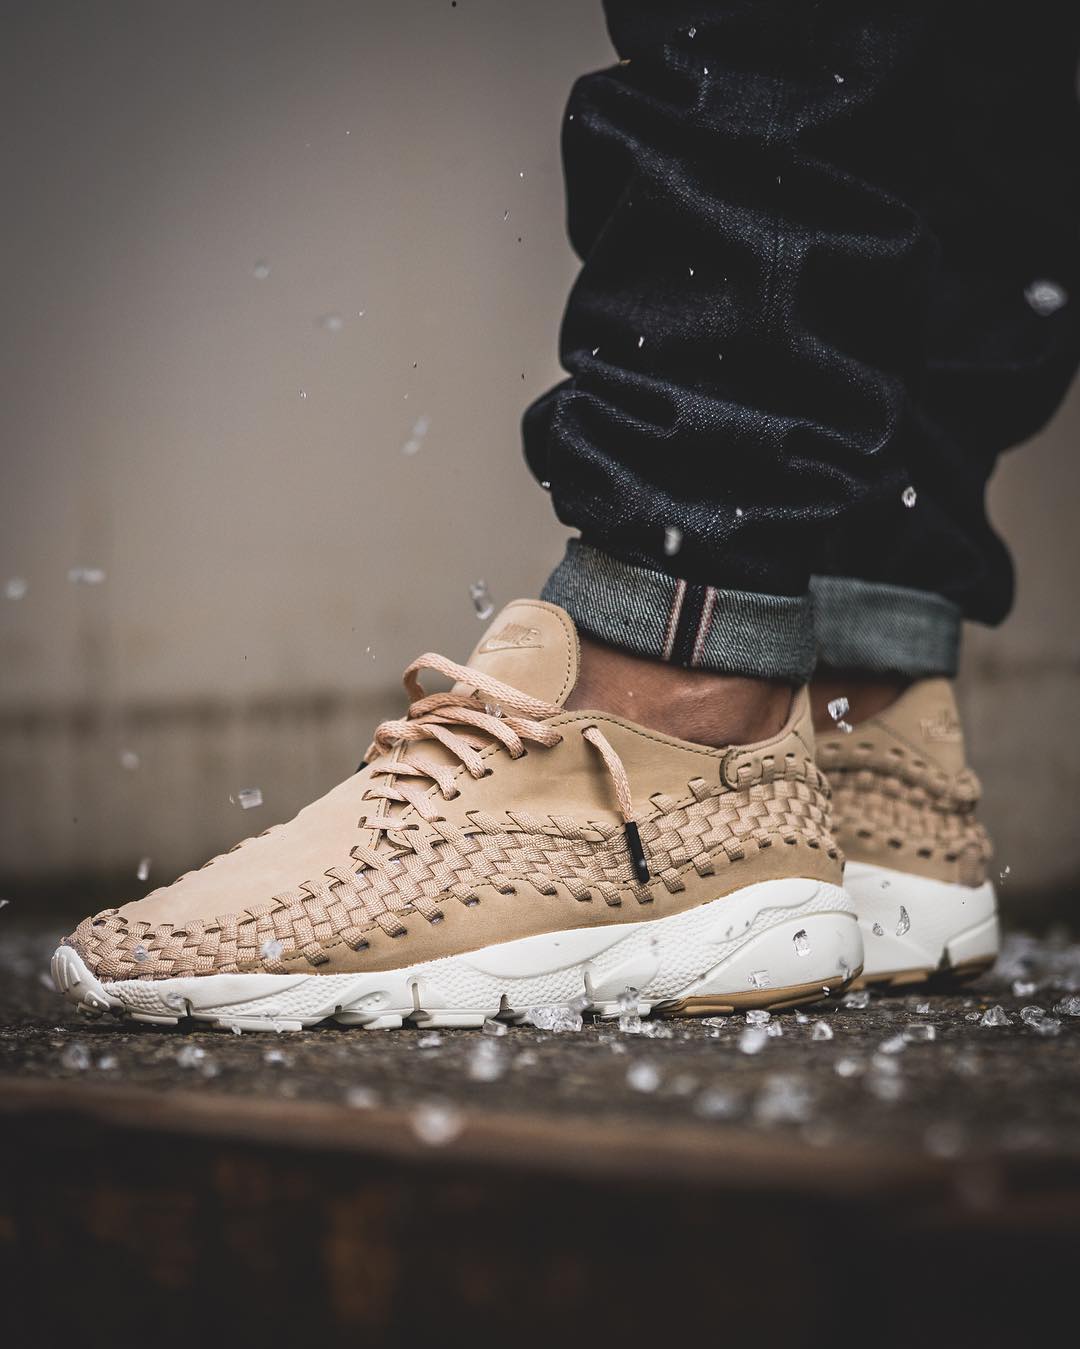 Nike Mayfly Woven isn’t just a track shoe